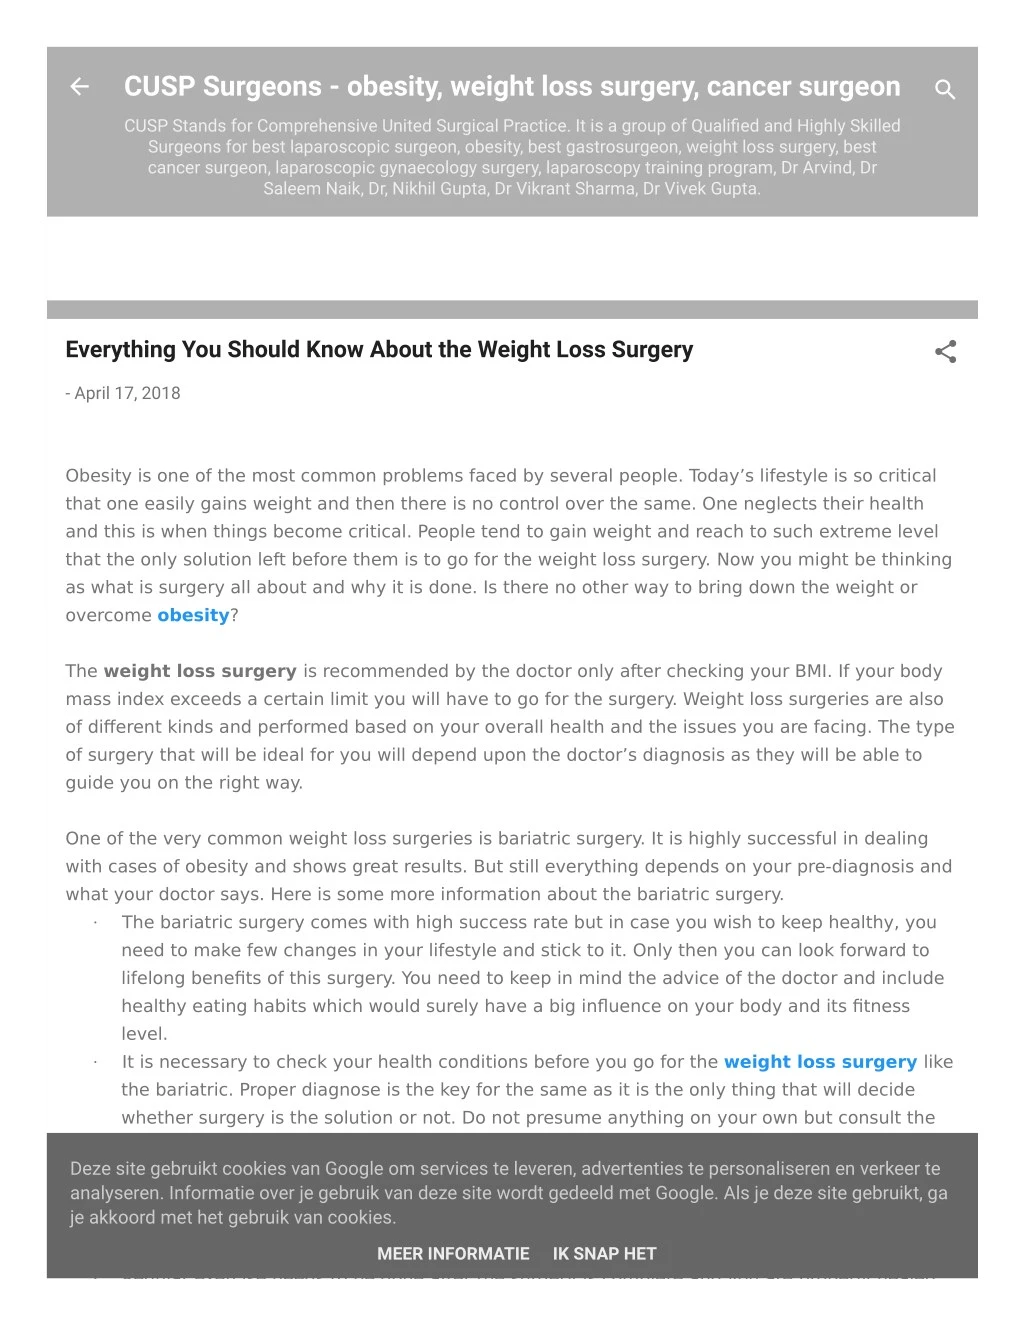 cusp surgeons obesity weight loss surgery cancer